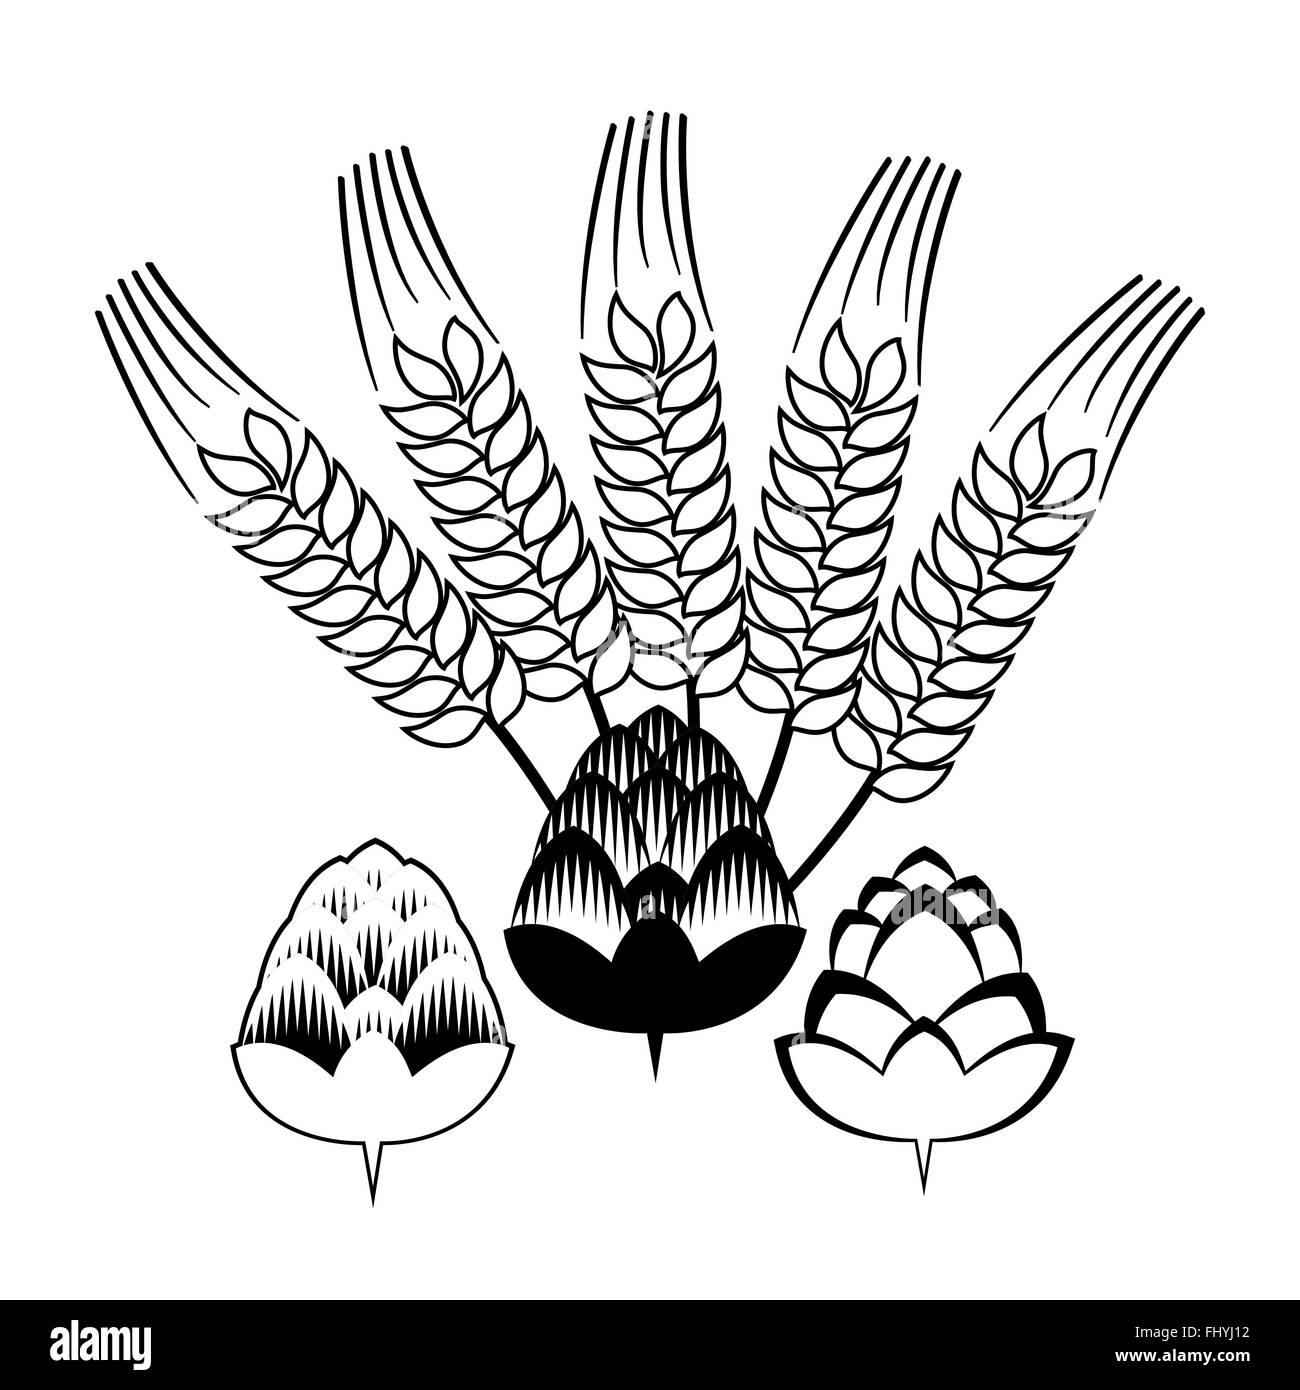 Black and white hop flowers with spikes, doodles. Beer vector ...